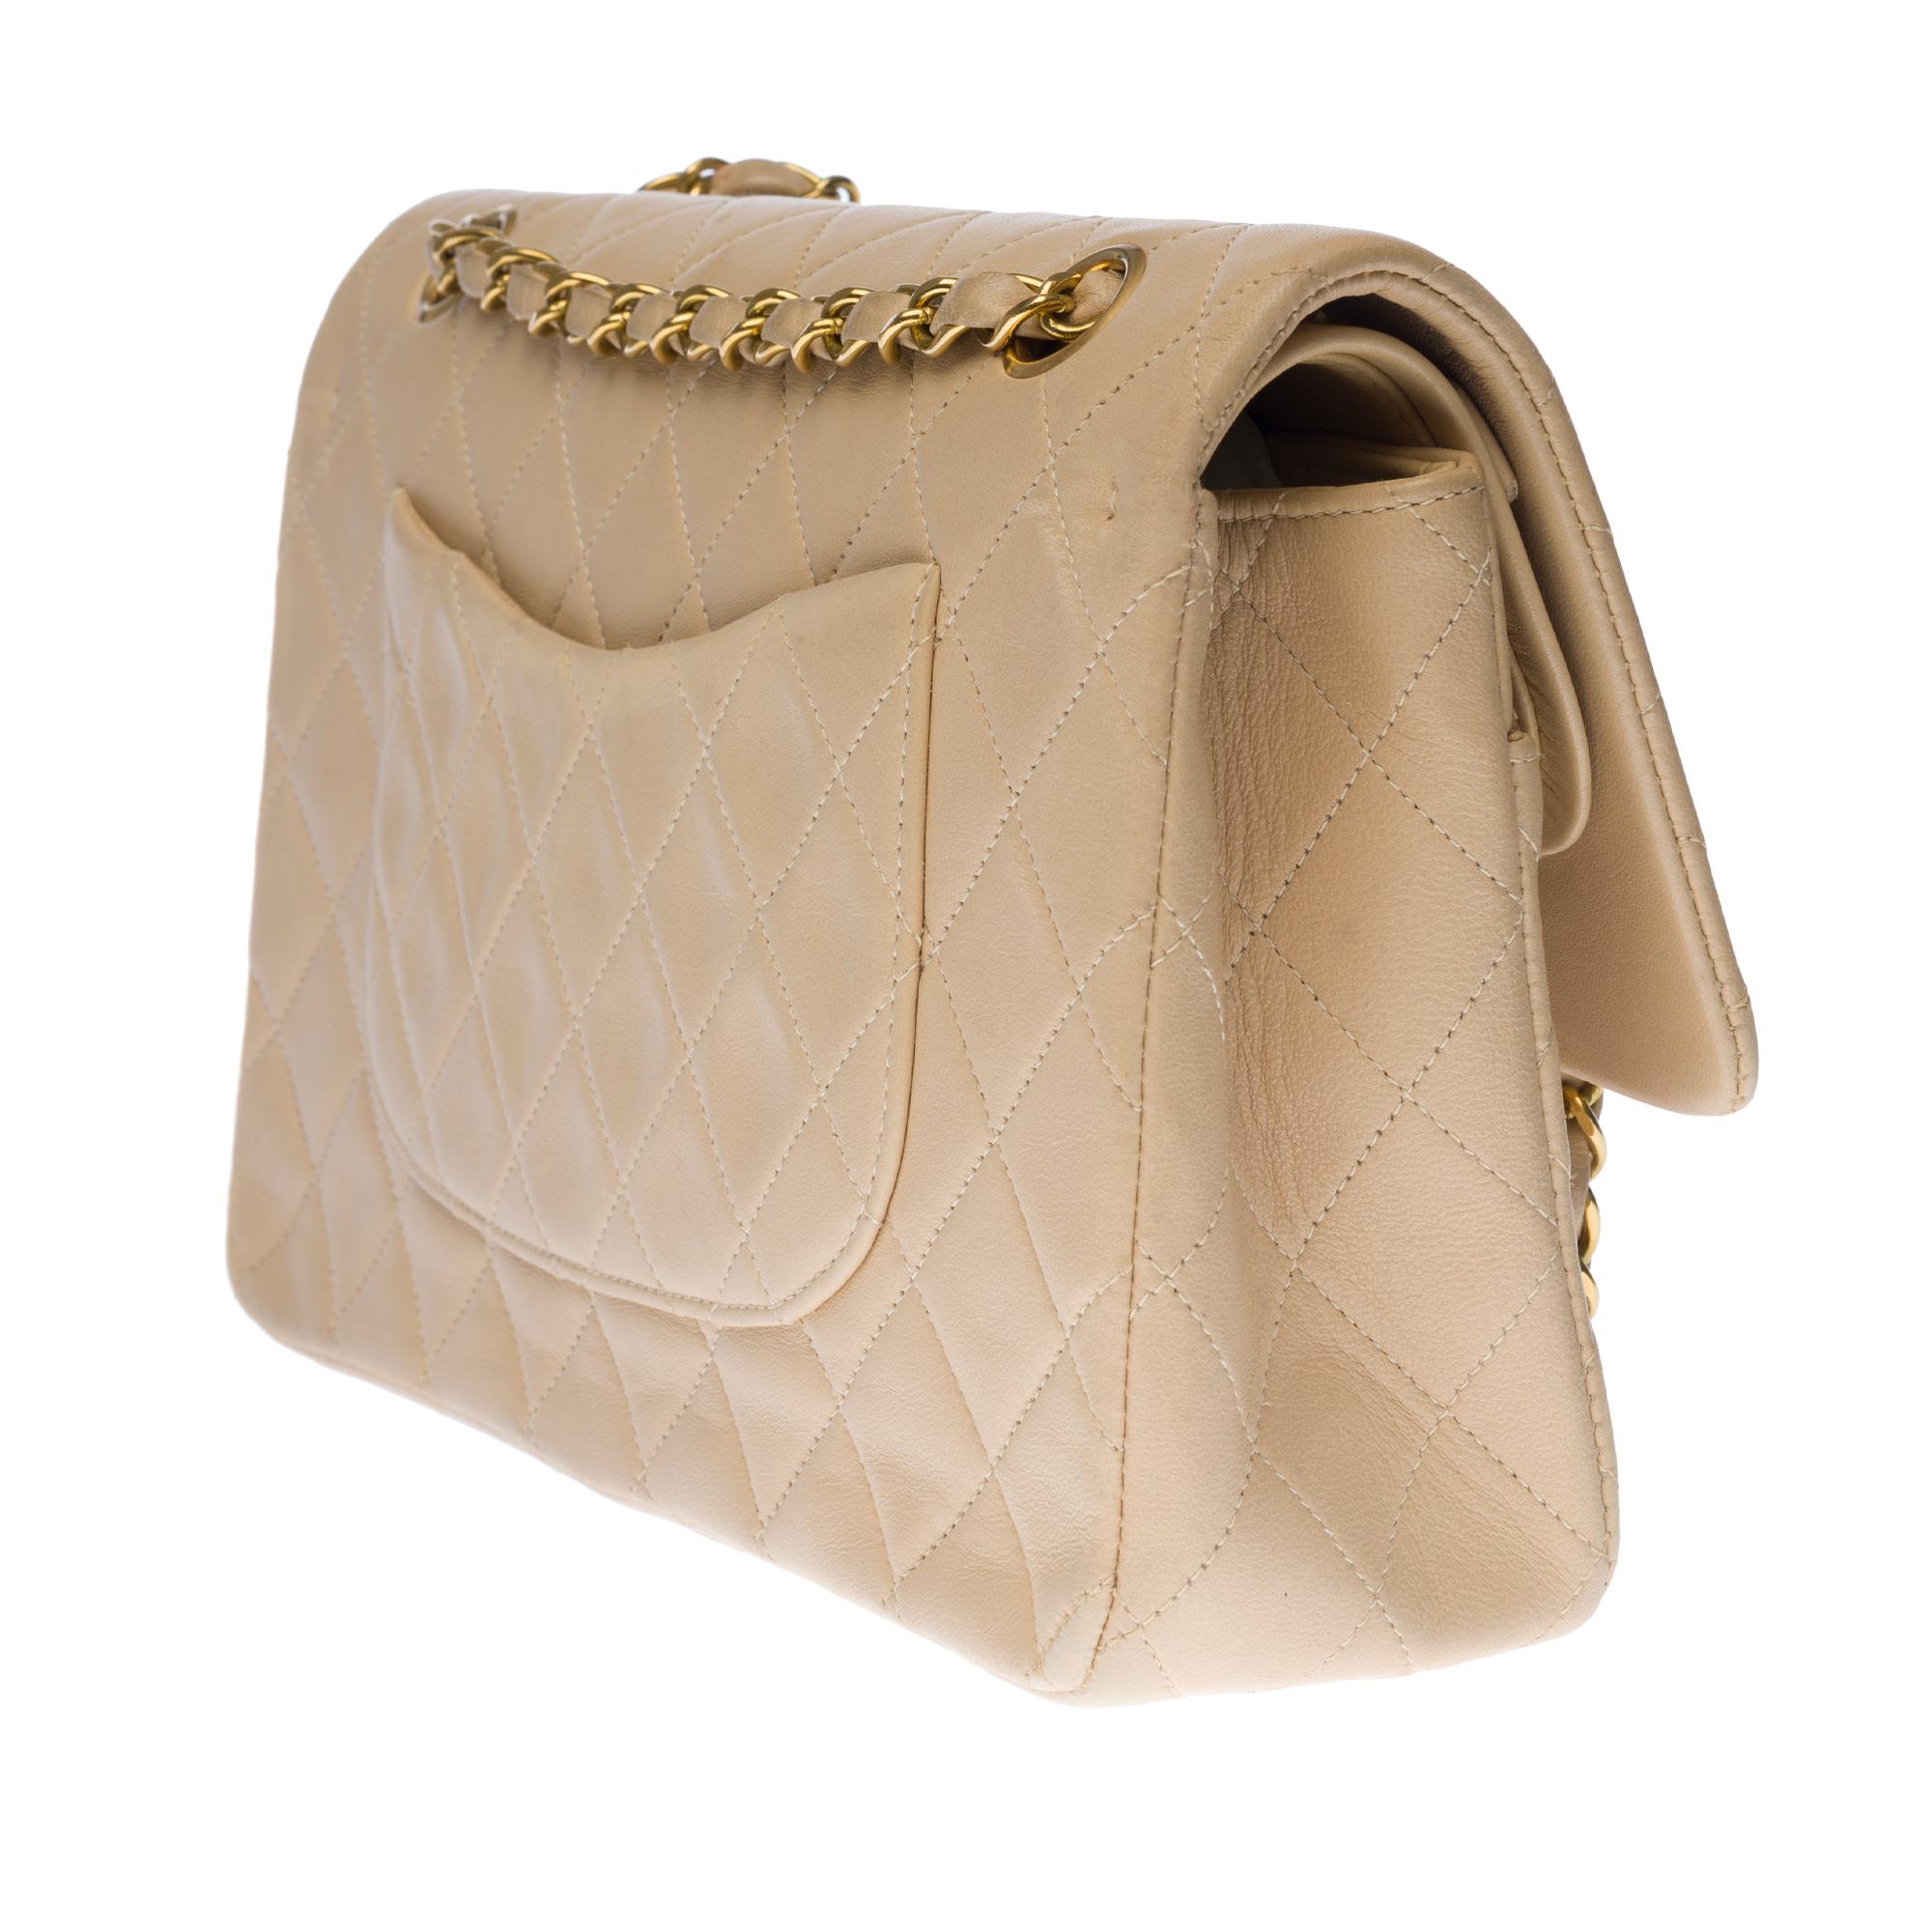 Women's Chanel Timeless Medium double flap Shoulder bag in beige quilted leather, GHW